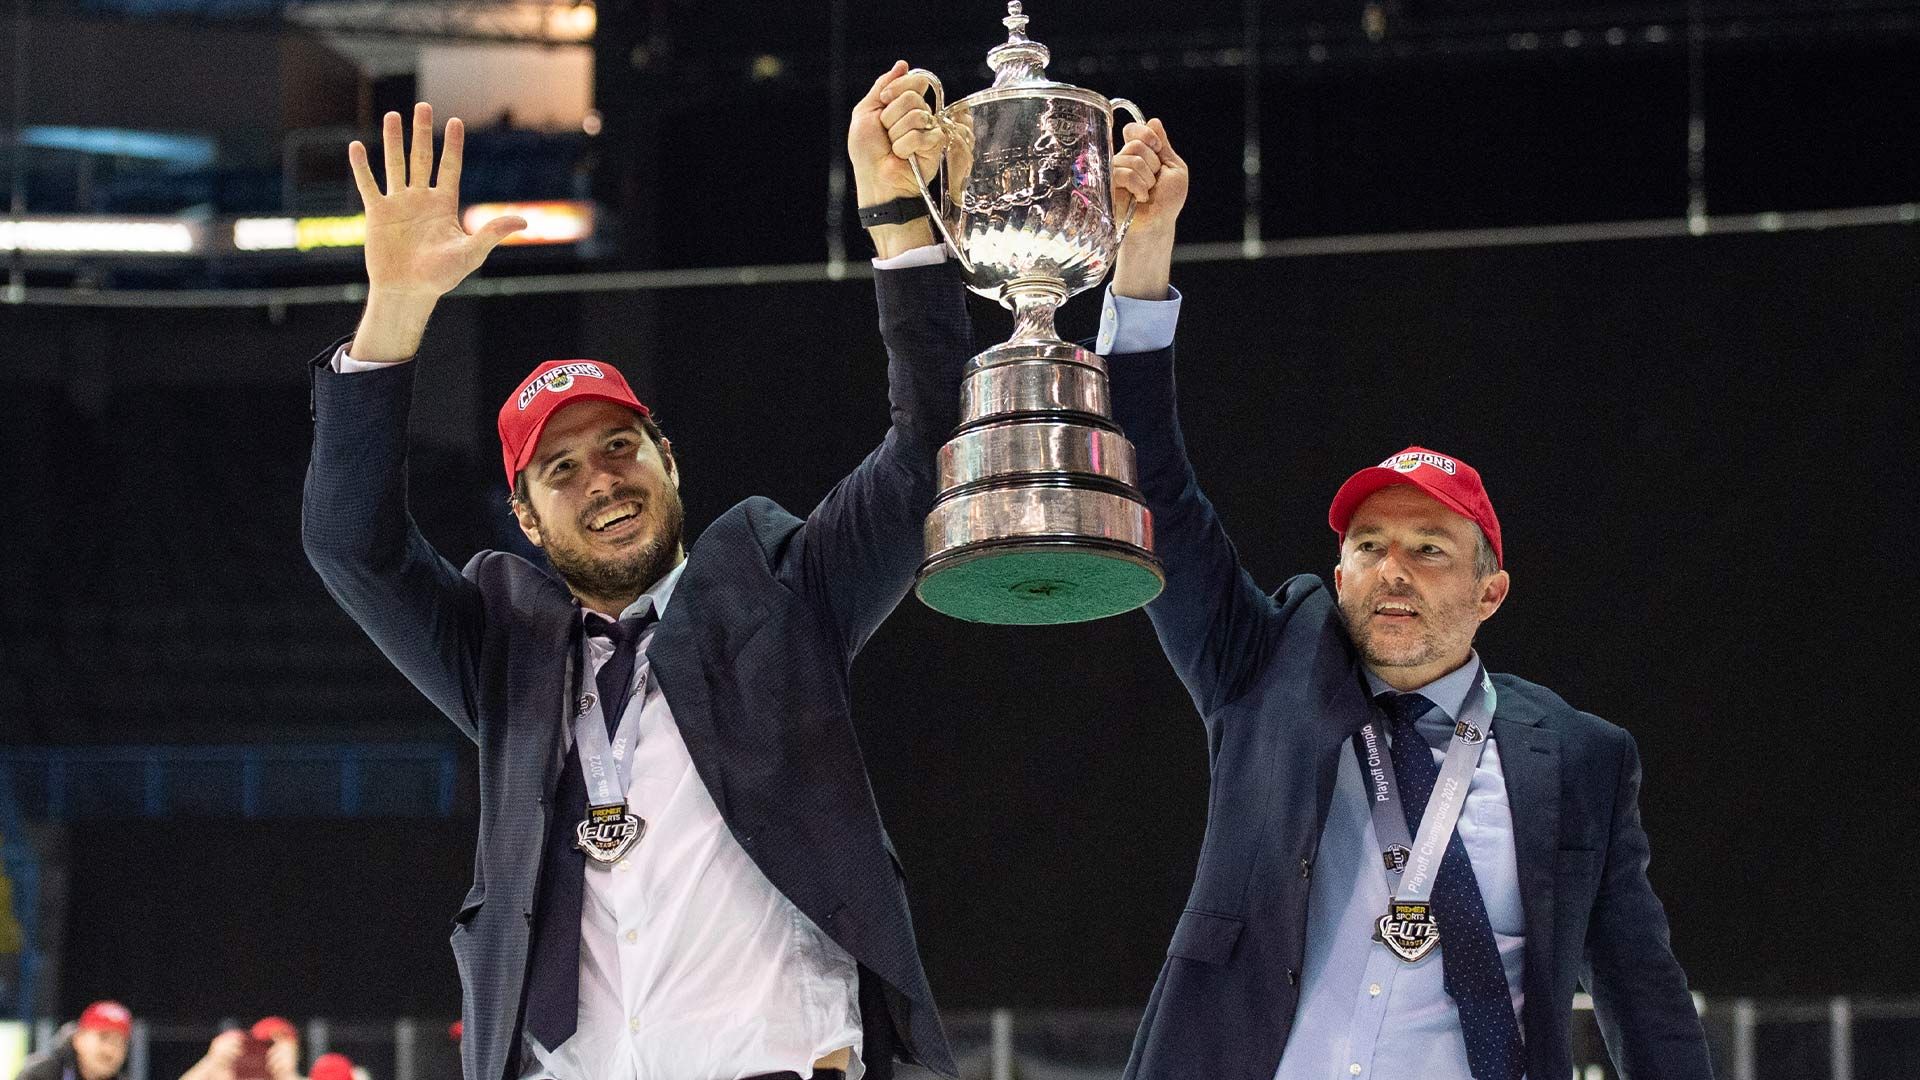 Brodie Dupont (left) guided the Cardiff Devils to Playoff Finals Weekend success as interim head coach (Image: James Assinder)